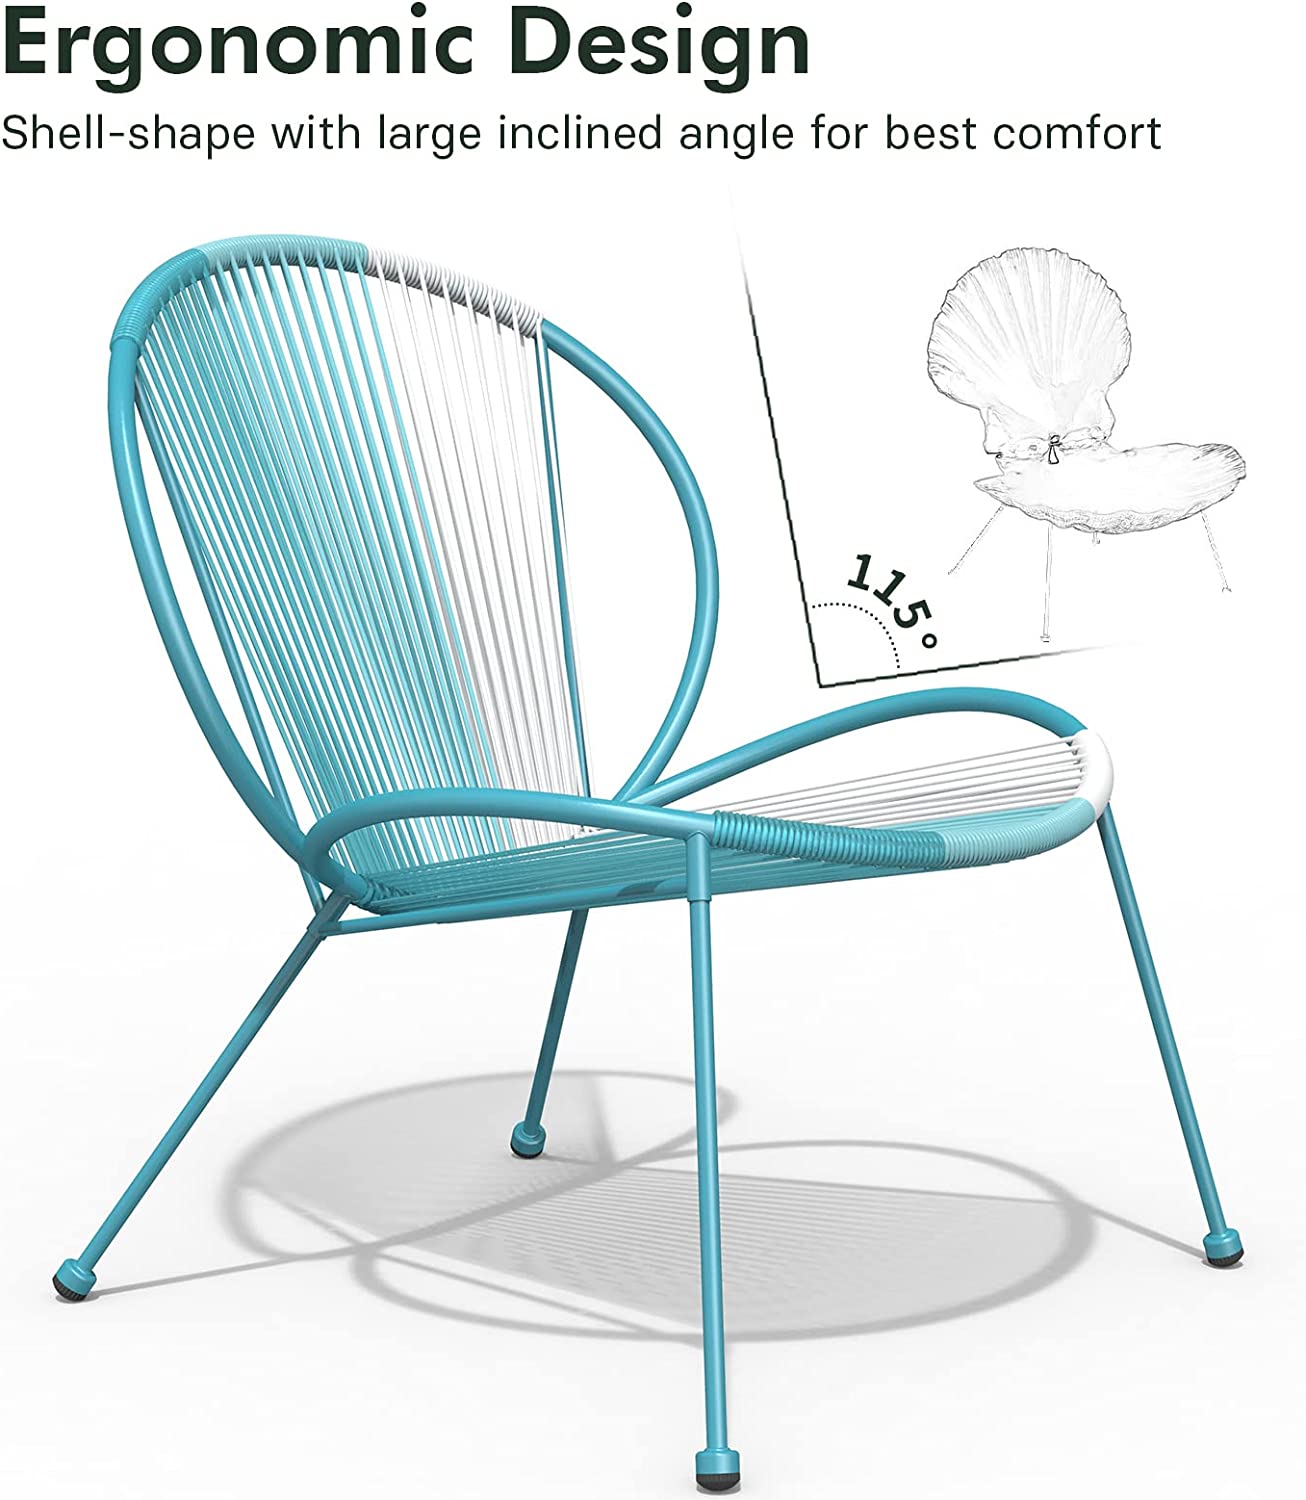 The Iconic Acapulco Chair: Embracing Style and Comfort